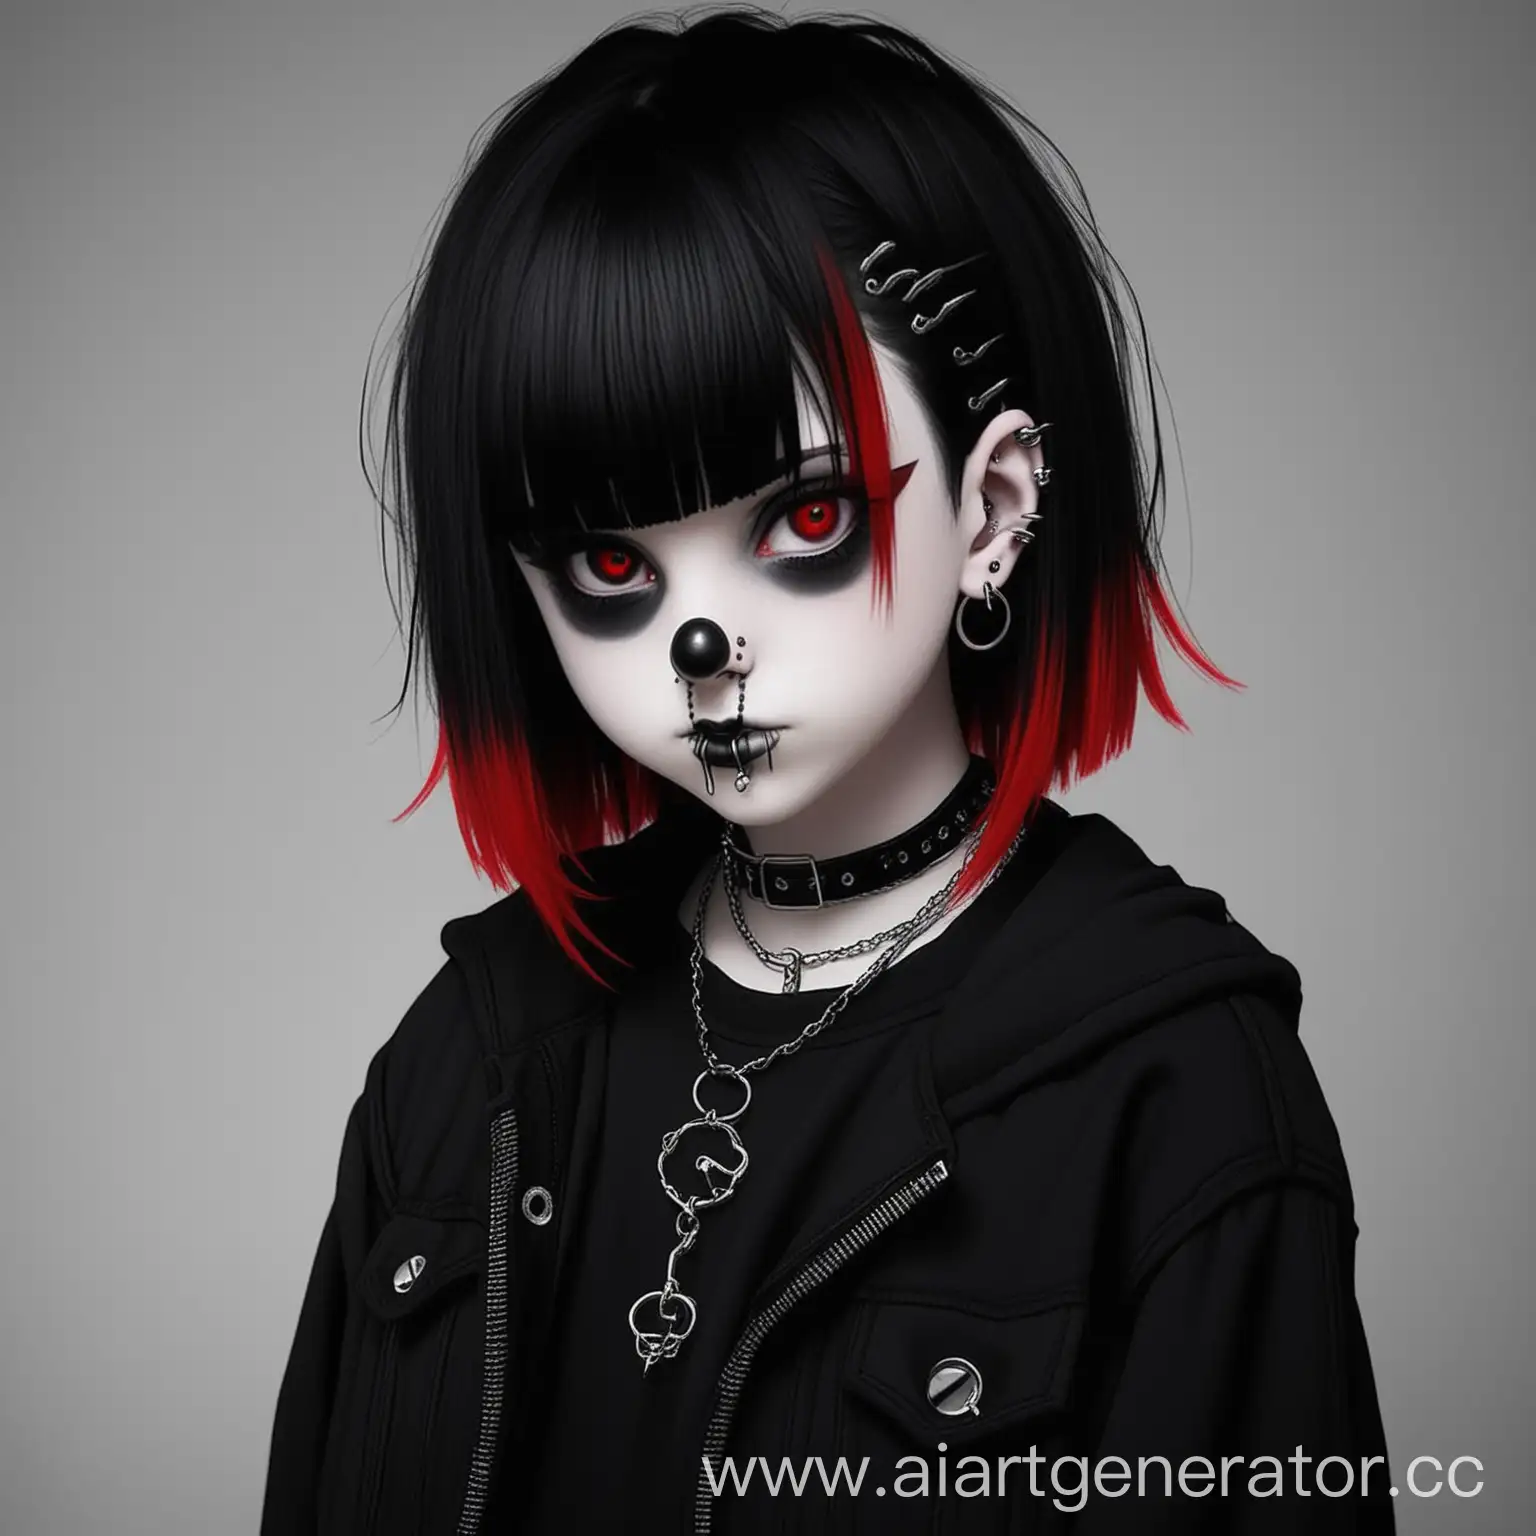 Teenage-Goth-Girl-with-Short-Black-Hair-and-Red-Bangs